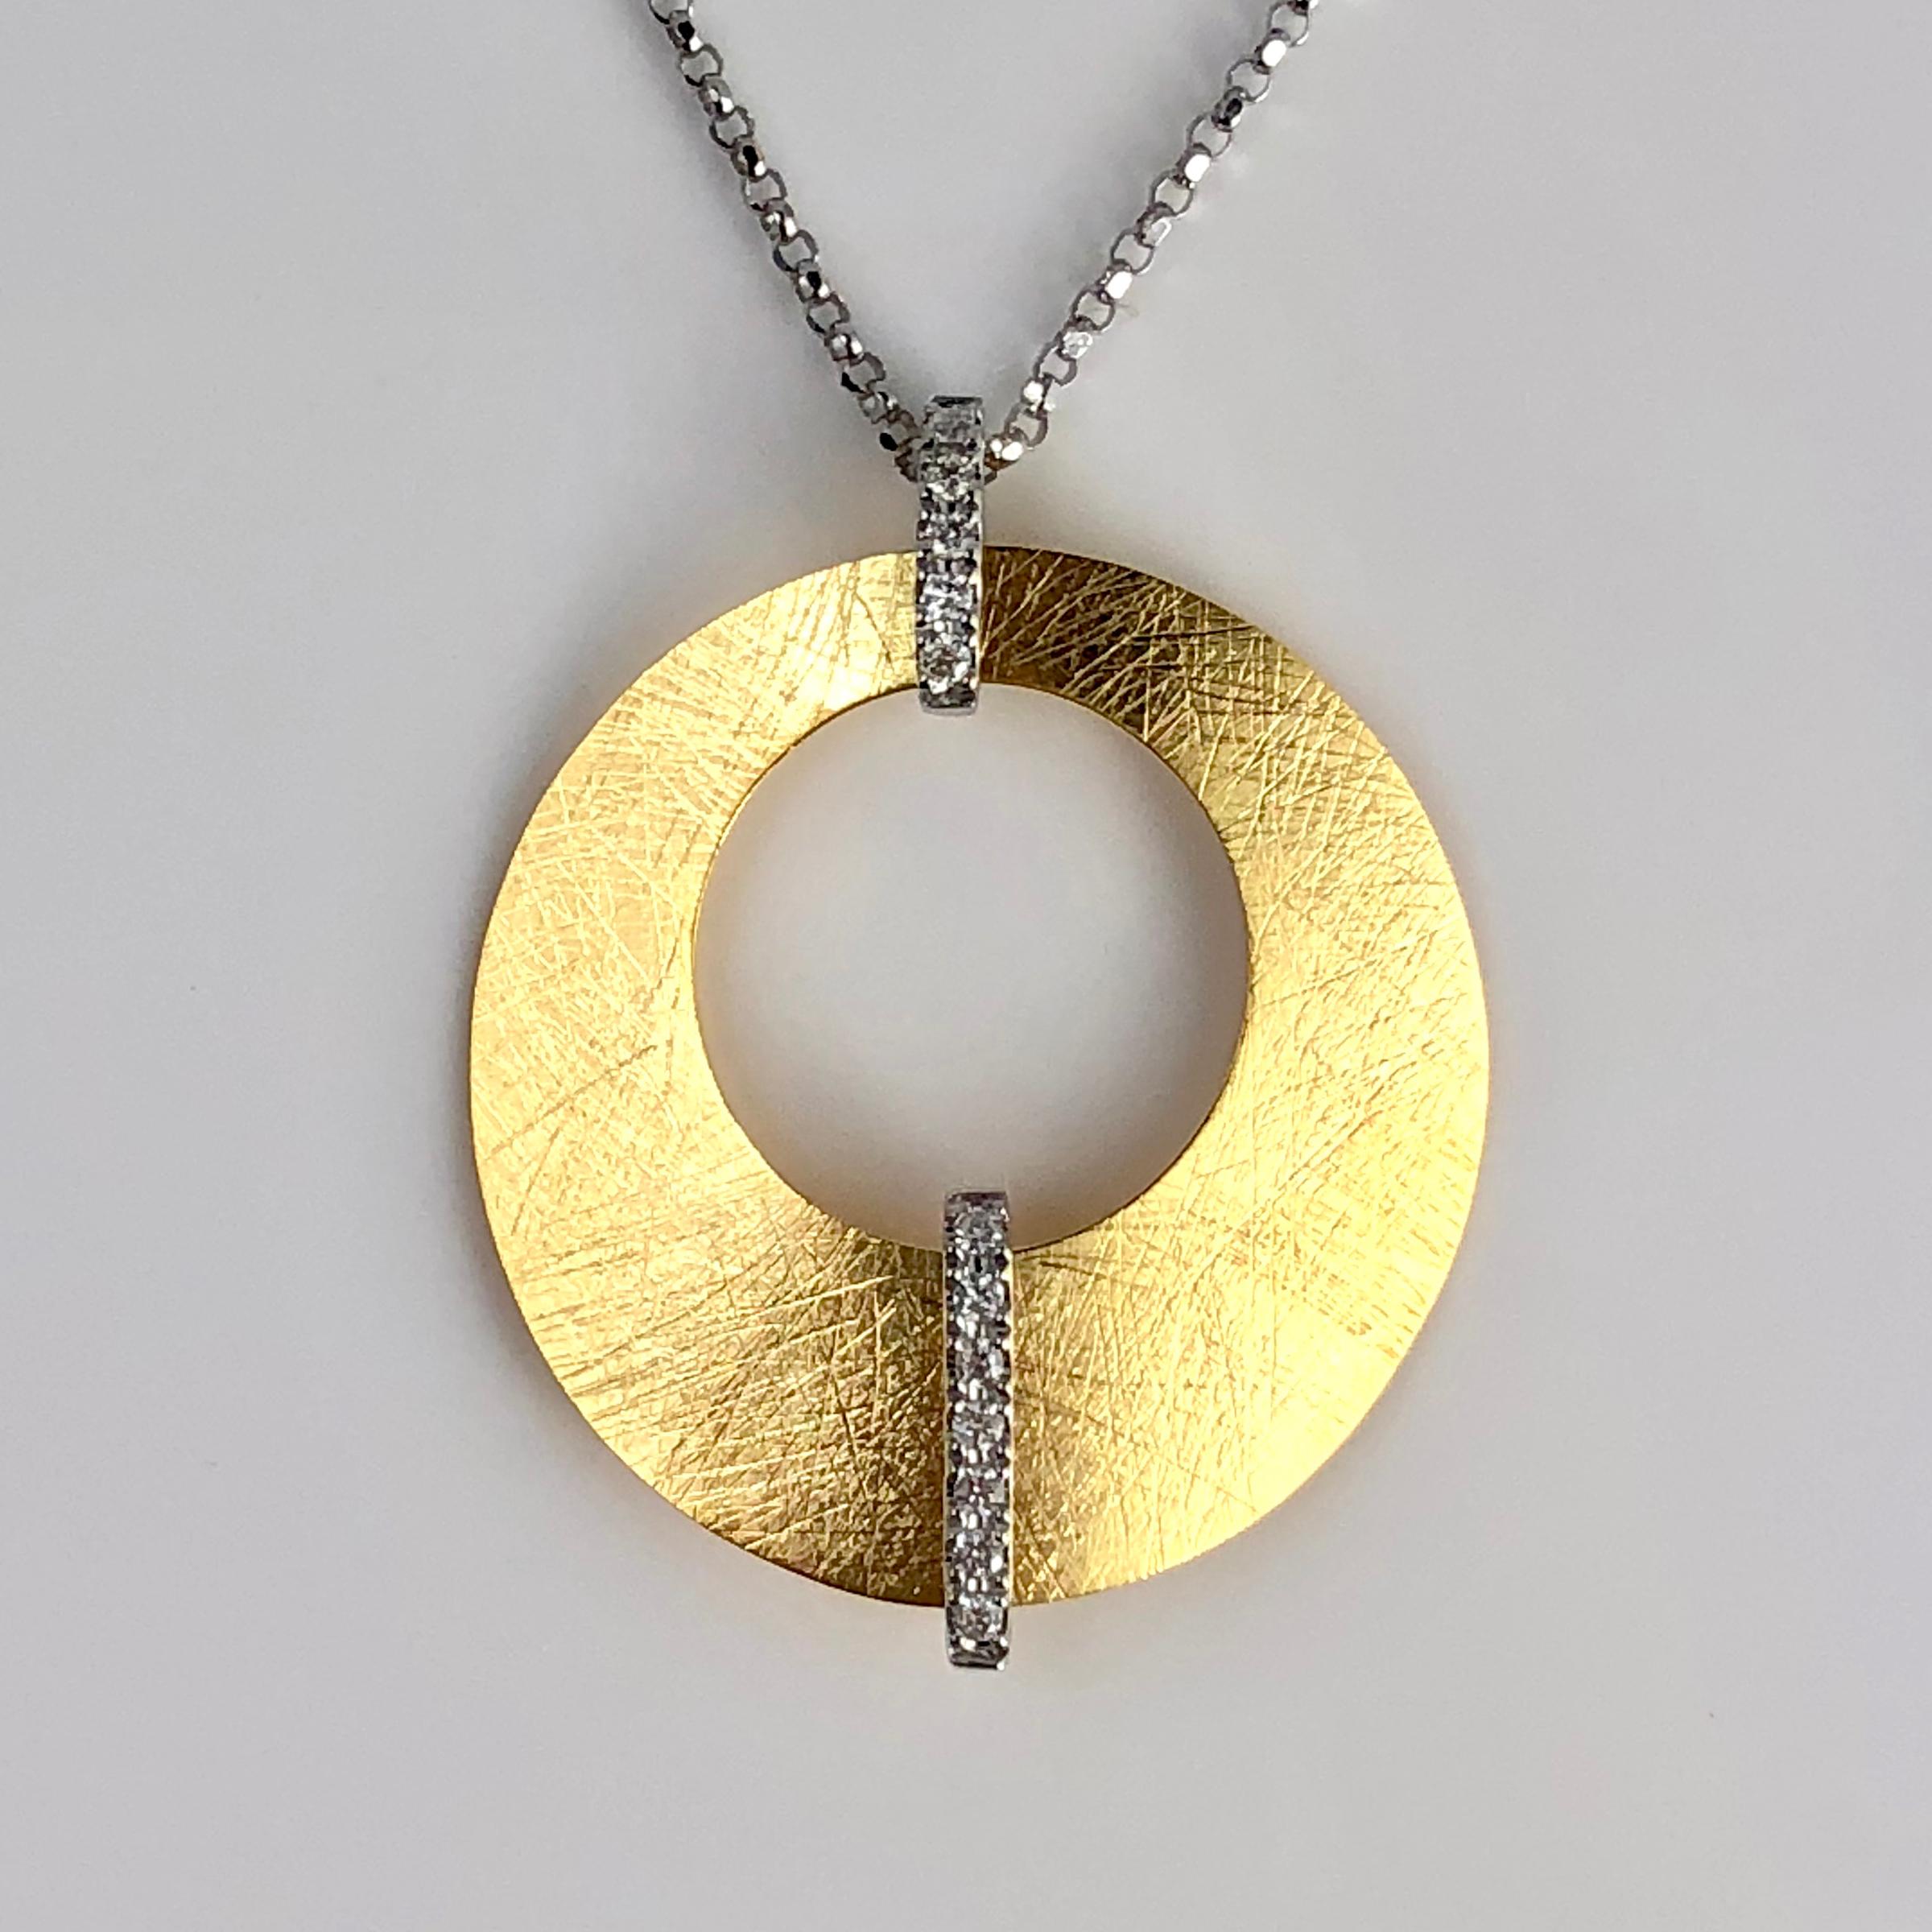 This pendant is a round yellow gold disc with a round cutout. A line of diamonds crosses the top and bottom of the design. The total diamond weight is 0.13 carats.

Set in 14k Yellow and White Gold.

Many of our items have matching companion pieces.